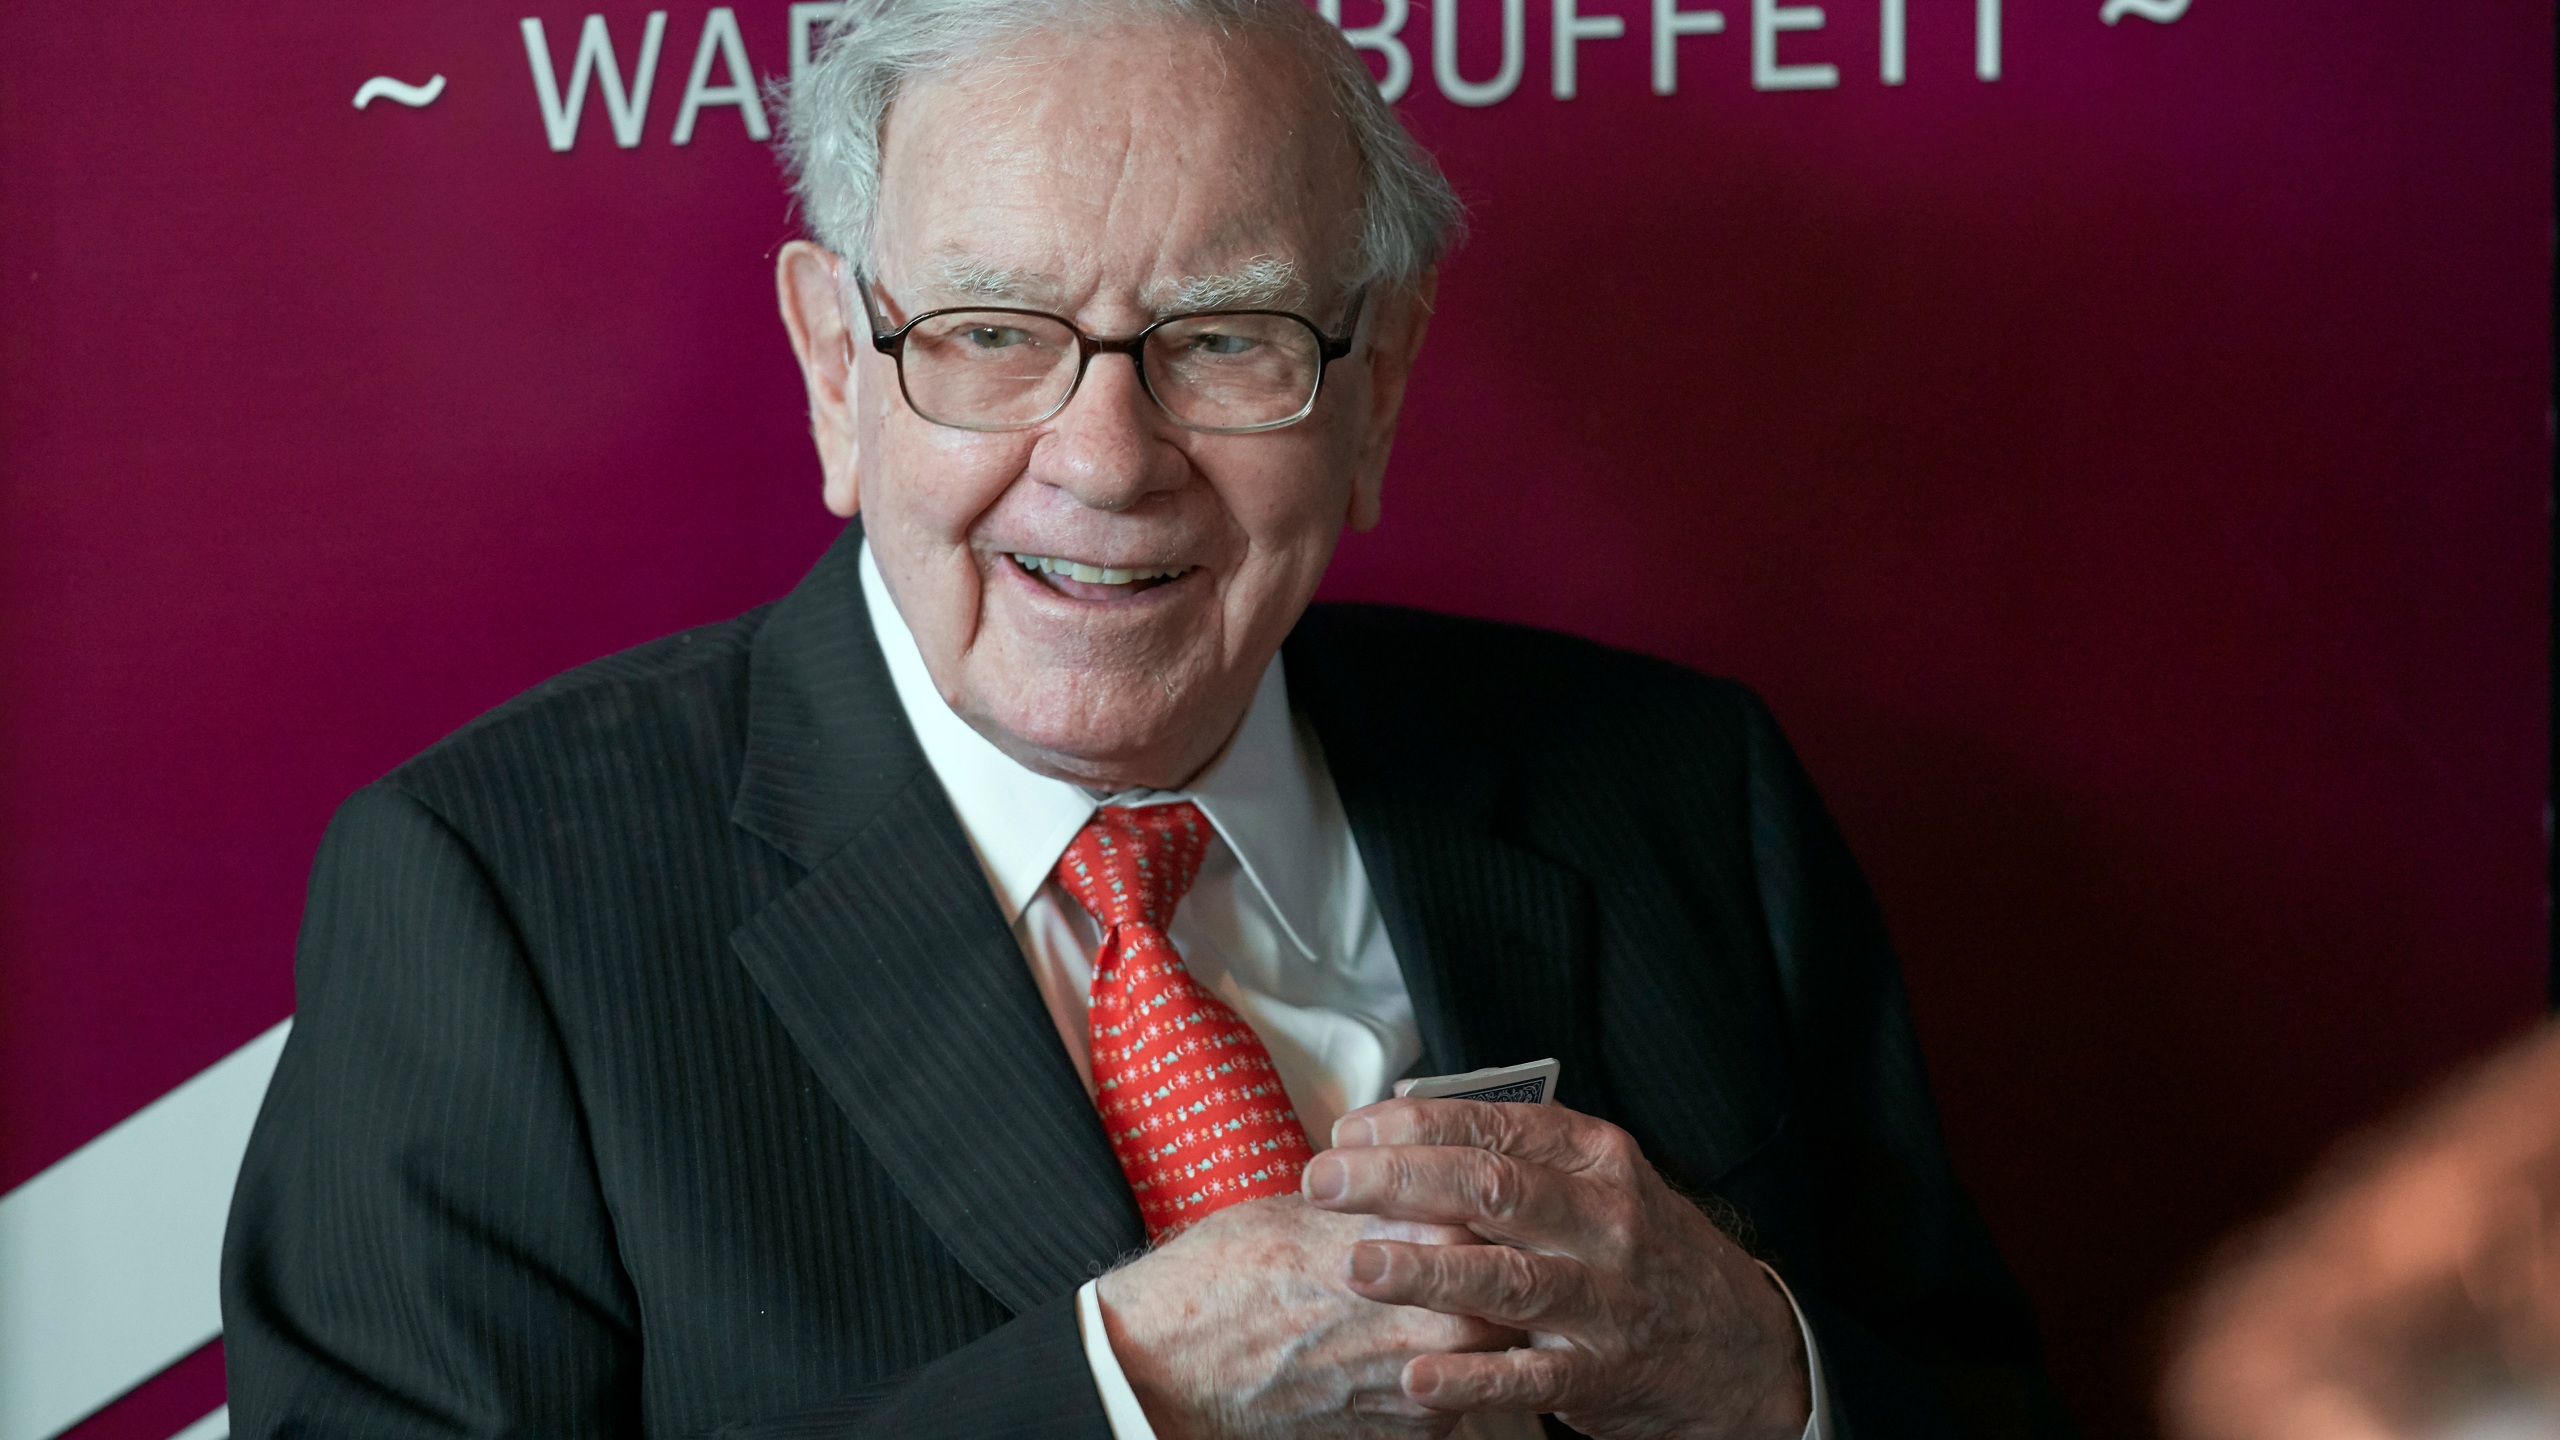 Warren Buffett says US, China can compete and both ‘prosper’ amid rising tensions